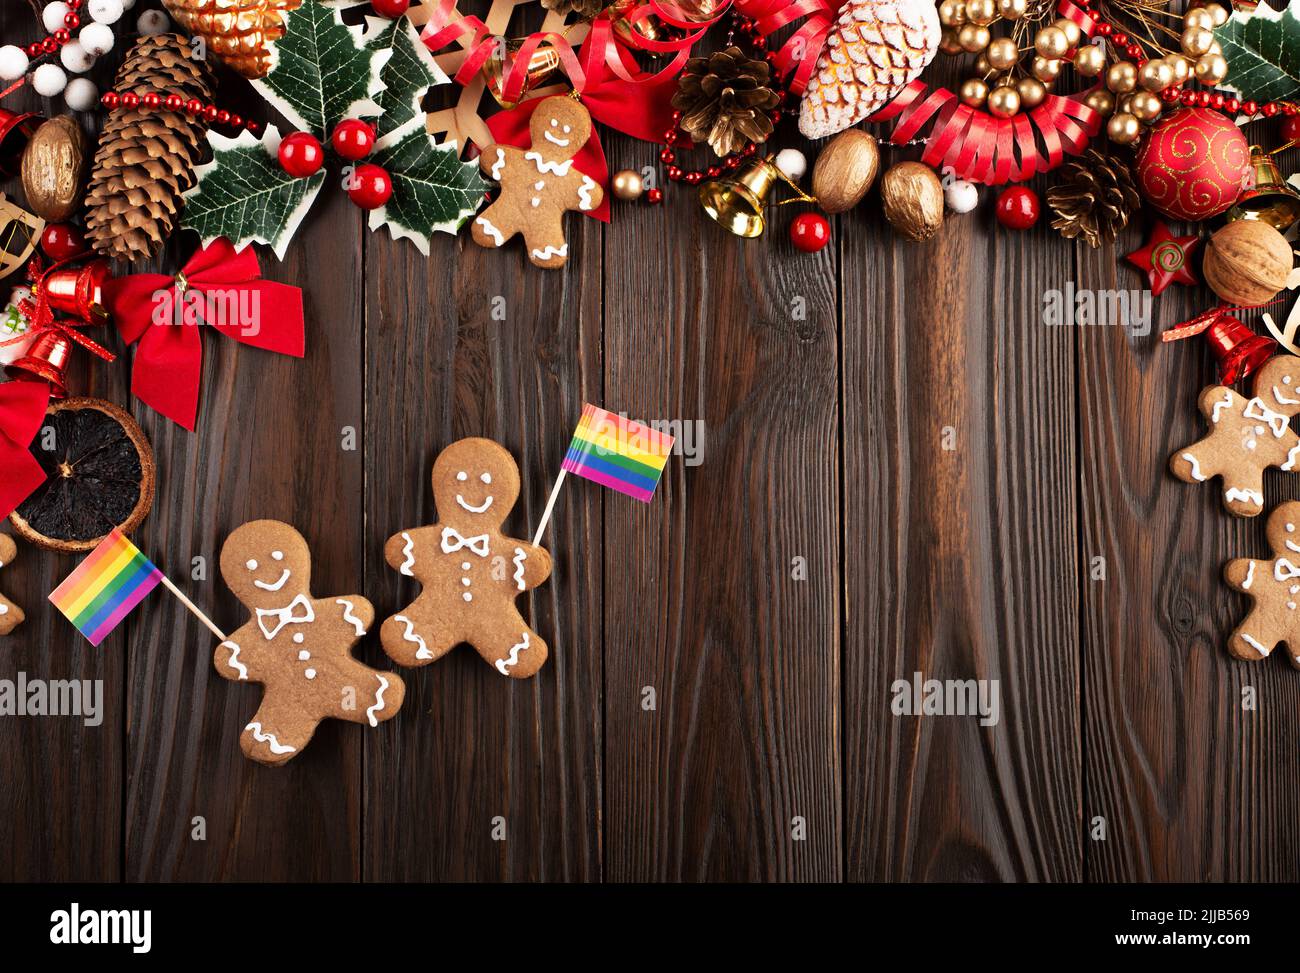 Christmas background of gingerbread cookie men with rainbow flags on wooden table Stock Photo